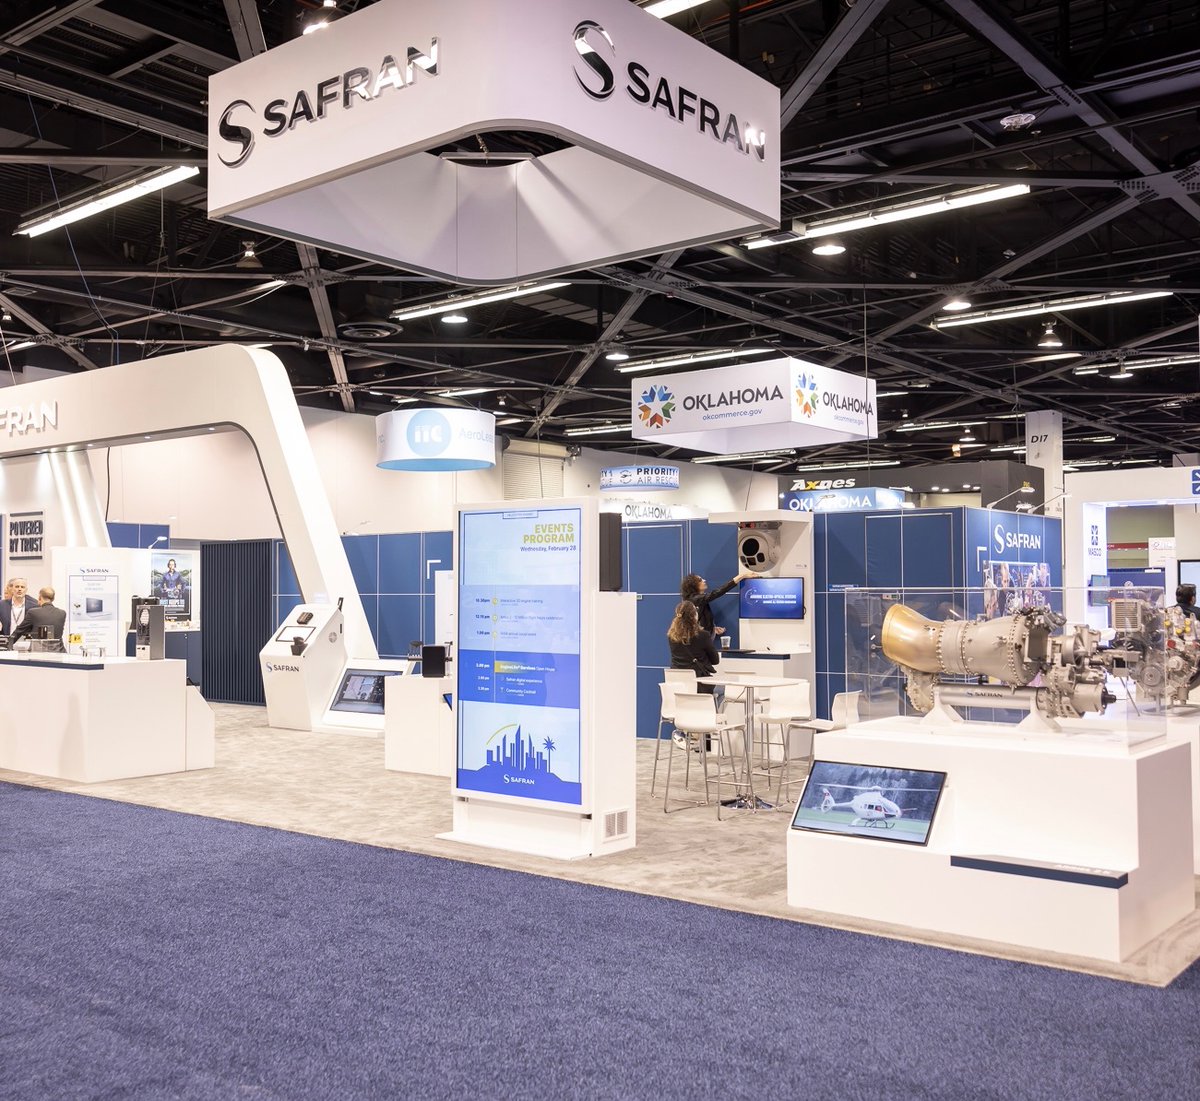 #HAIExpo24: @Safran is exhibiting a full range of solutions for the rotorcraft industry during @verticalavi Heli Expo in Anaheim, CA! Come learn about our helicopter engines, avionics solutions, electrical systems and safety systems for helicopters.